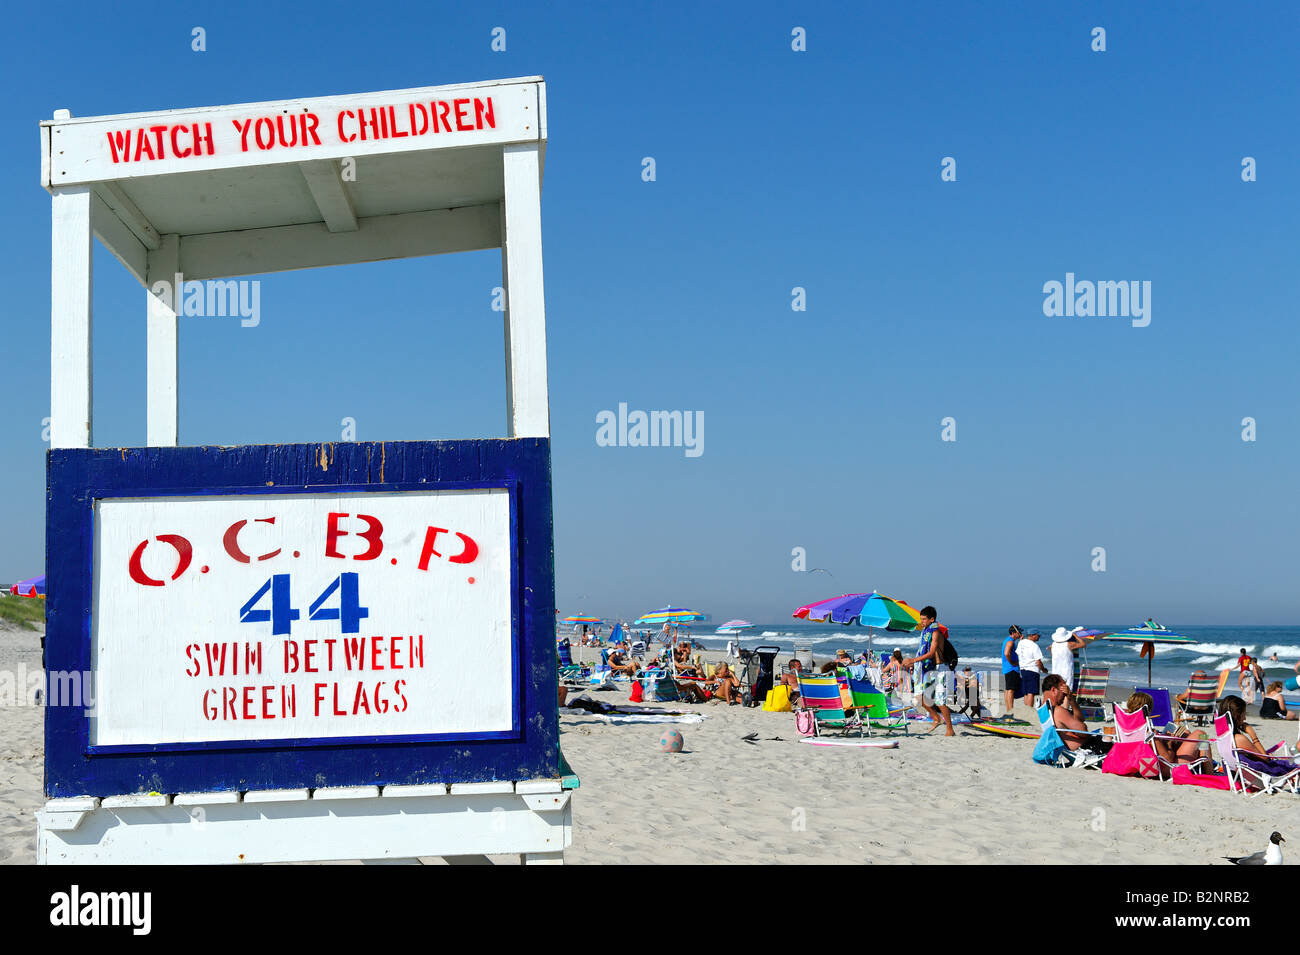 Lifeguard stand and crowded beach Stock Photo